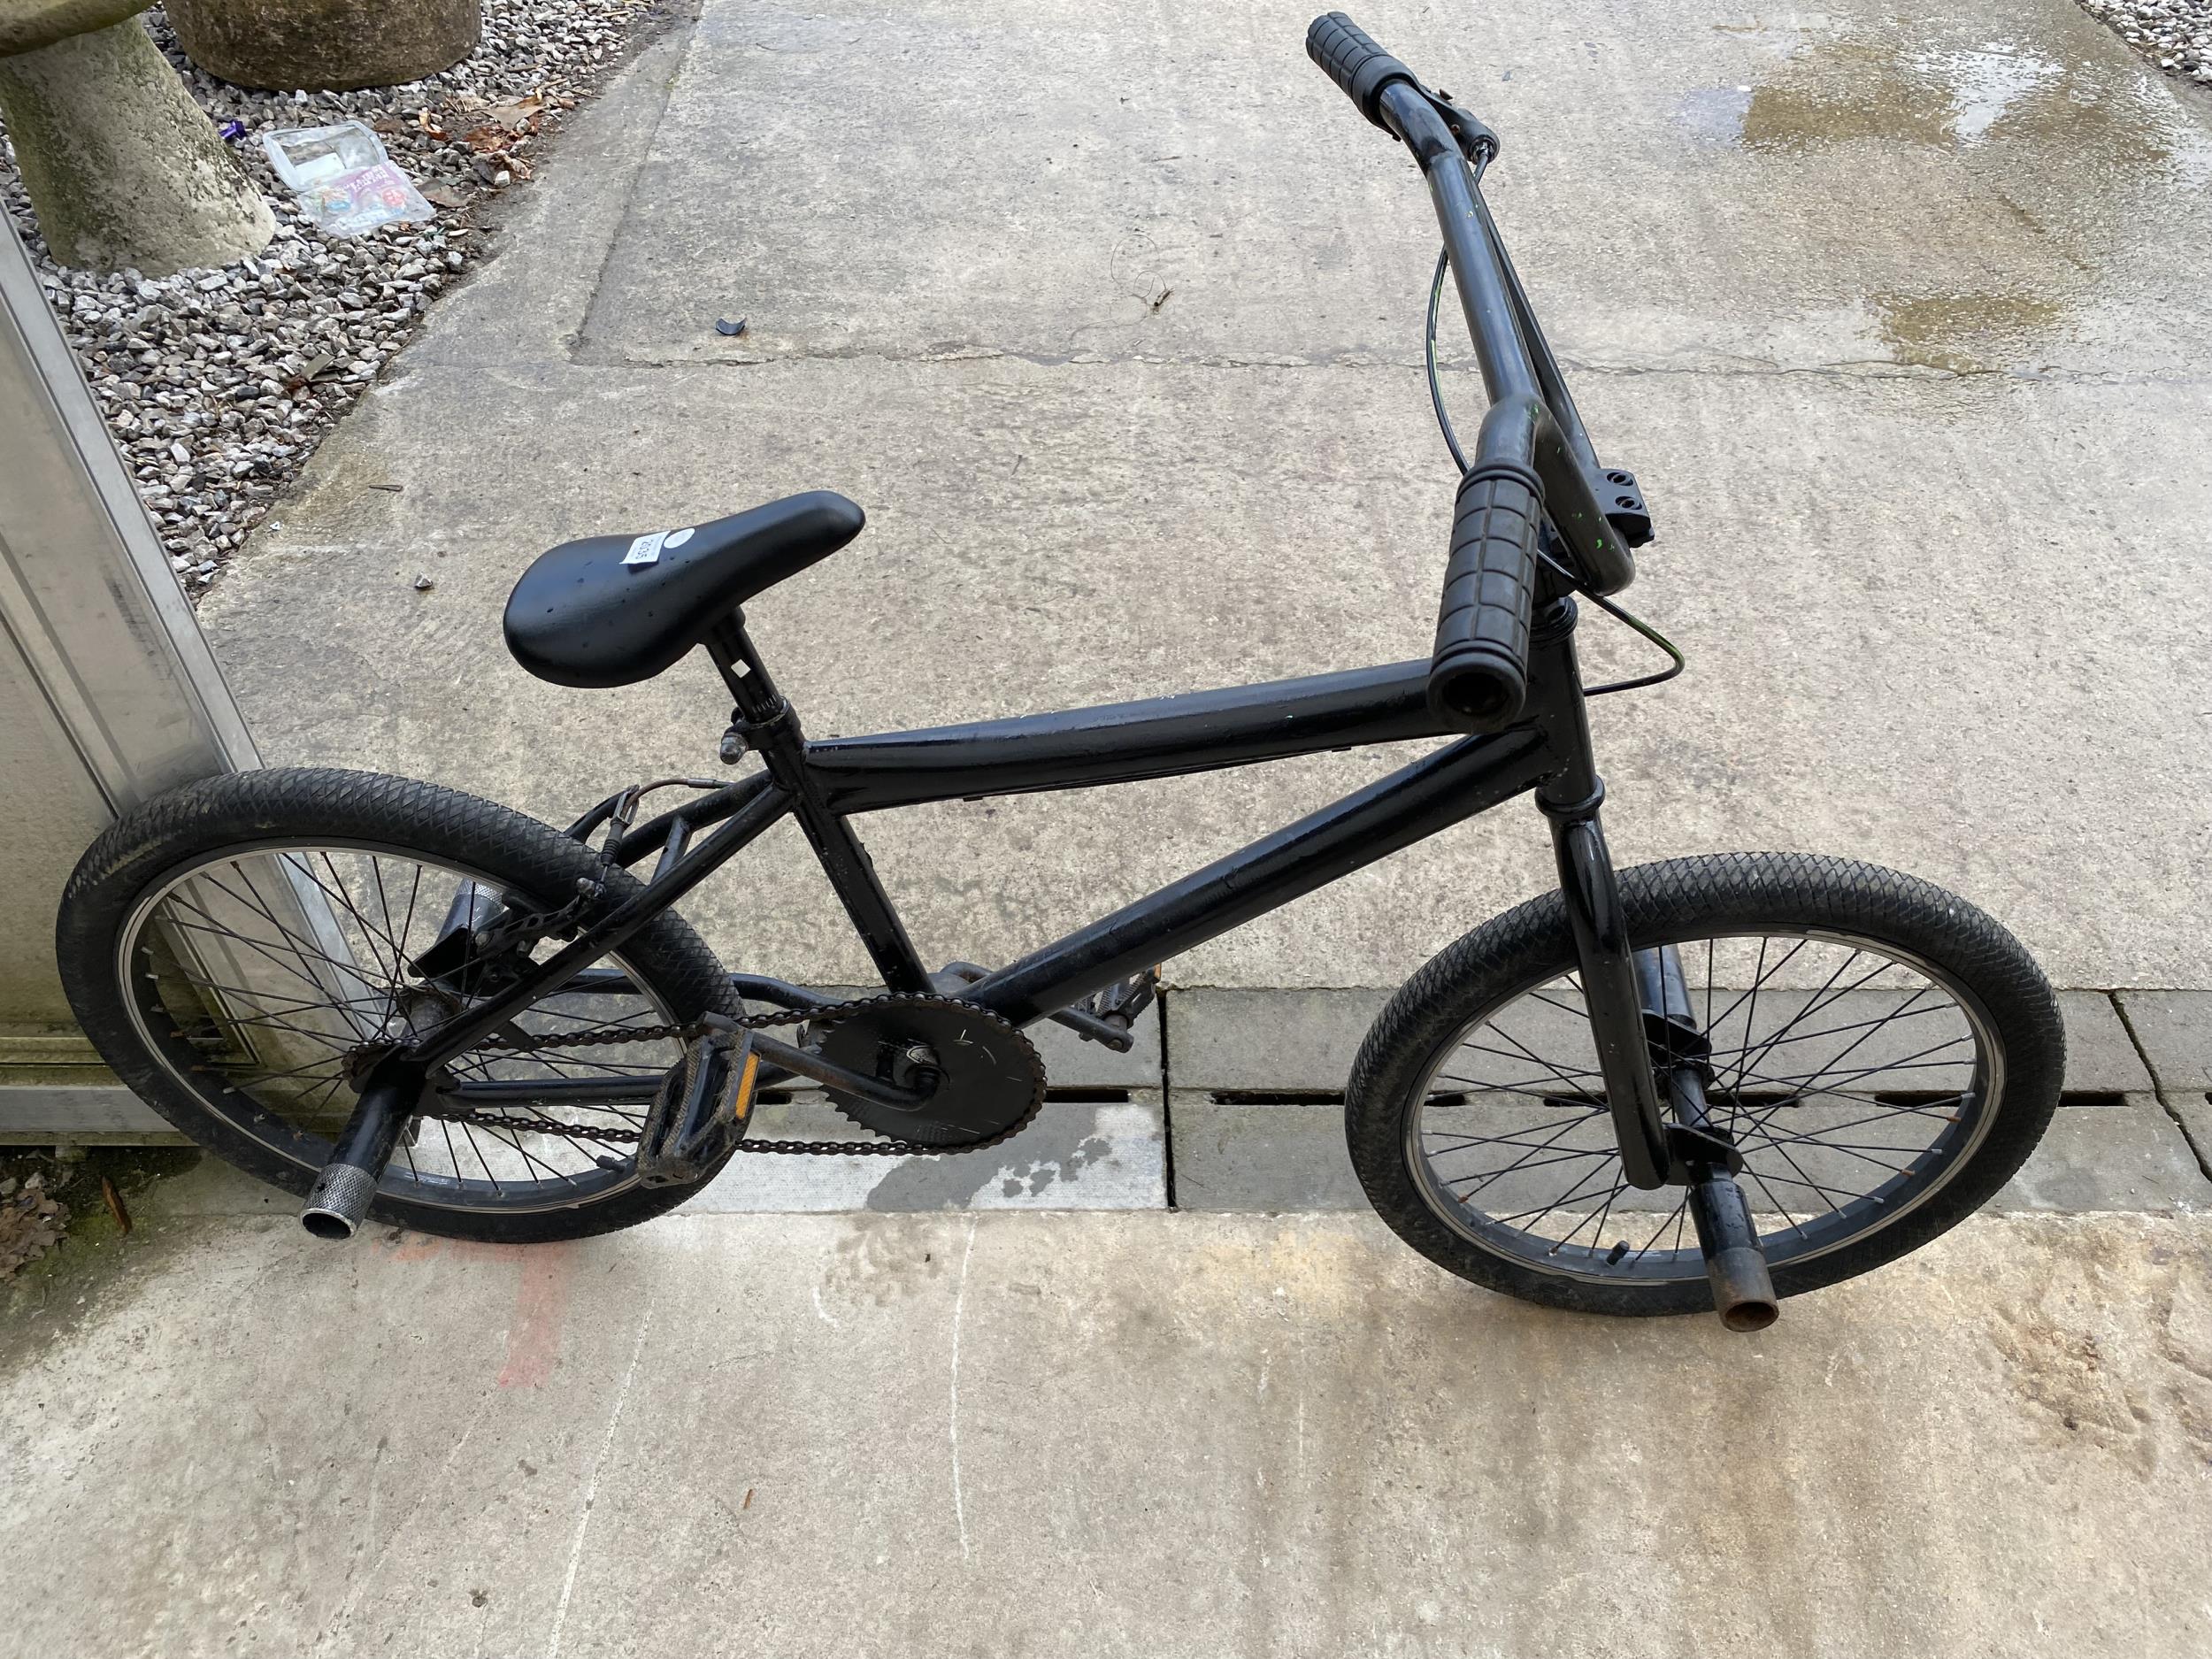 A CHILDS BMX BIKE WITH REAR STUNT PEGS